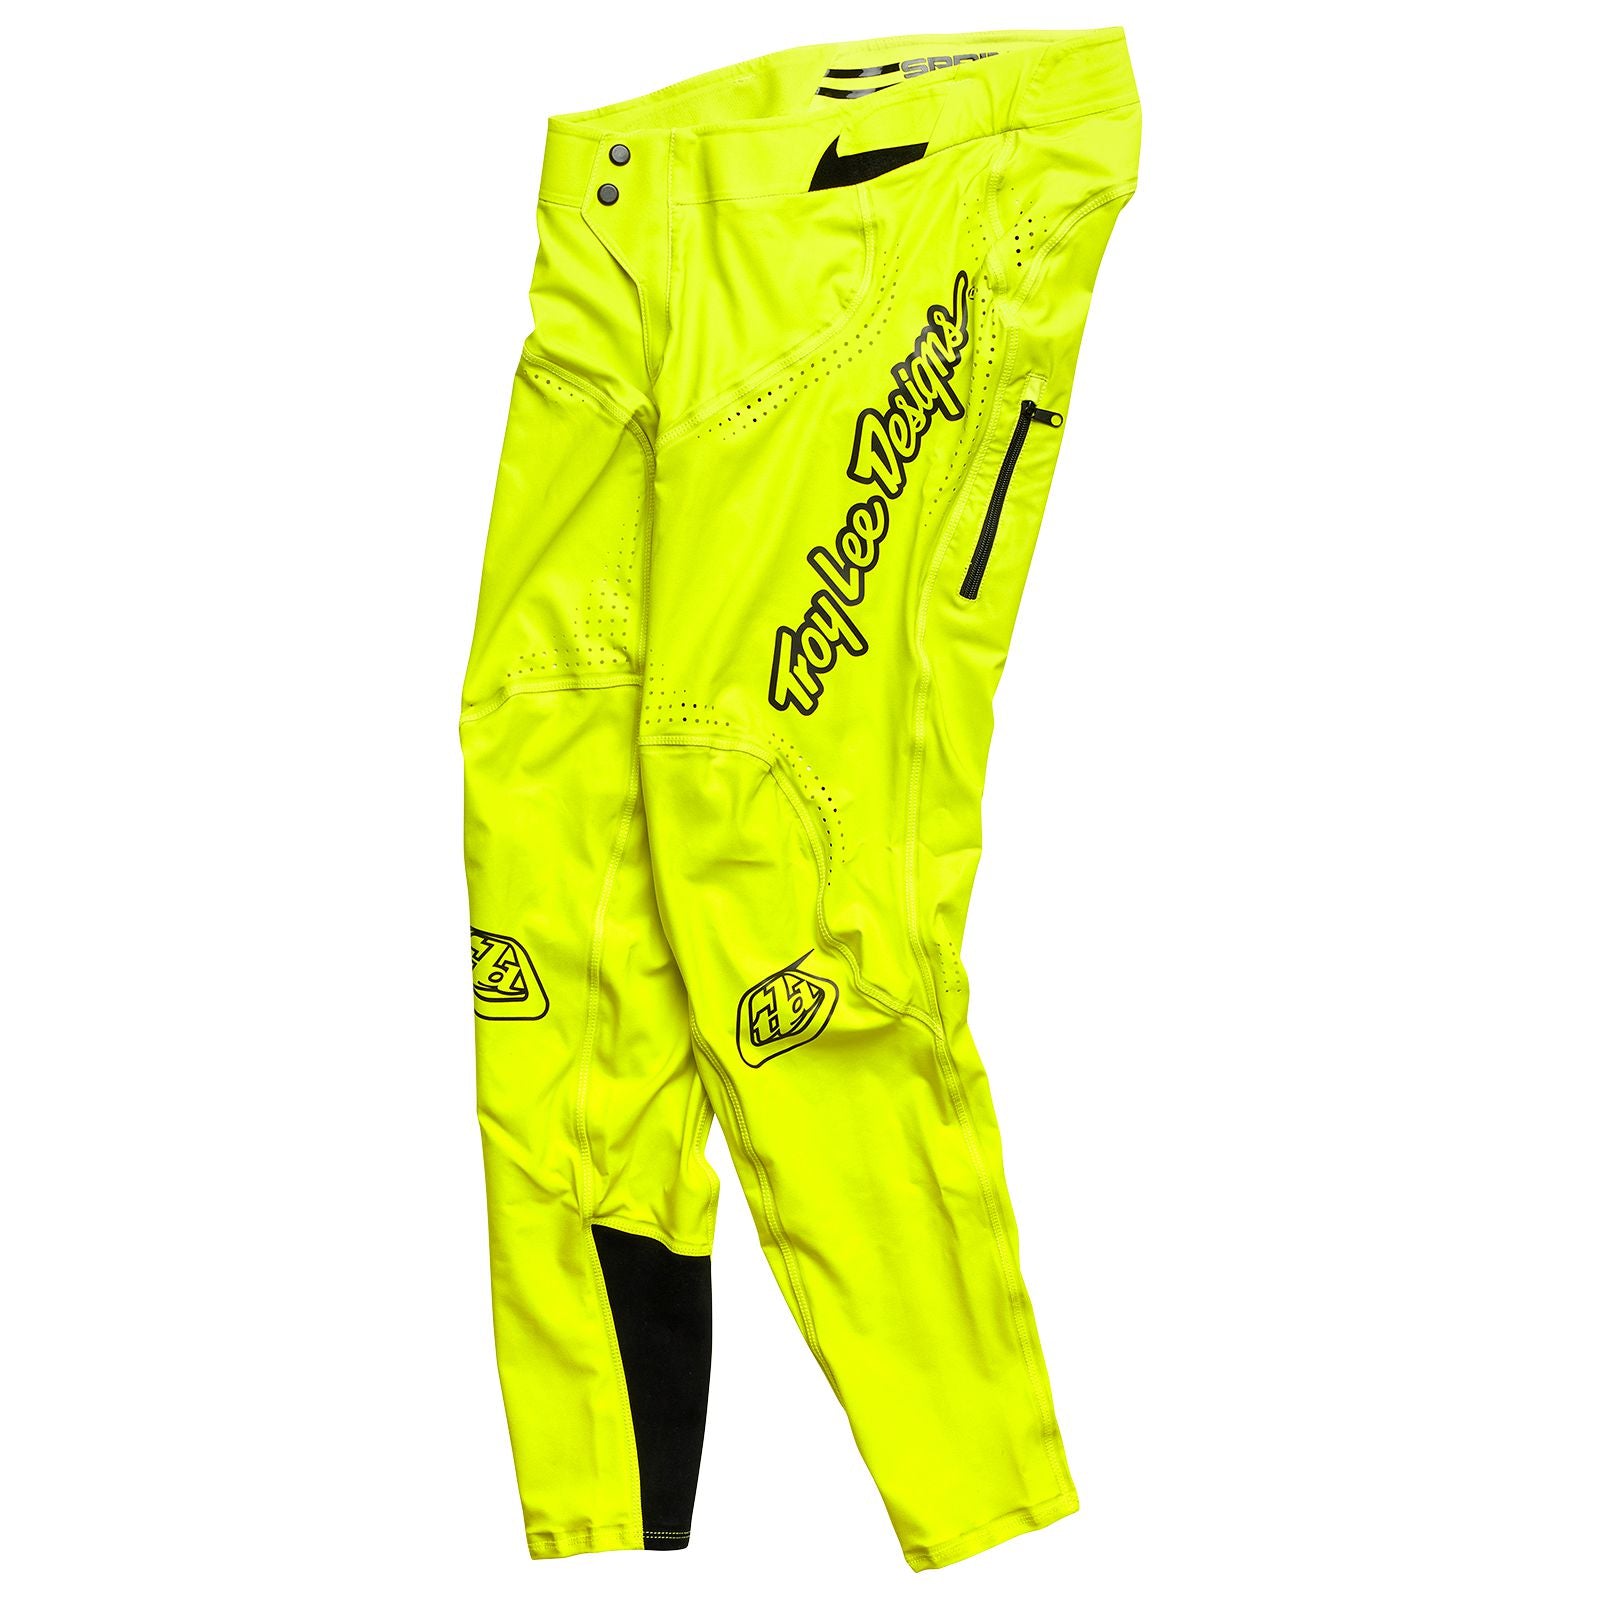 A yellow TLD Sprint Ultra Pant Acid with black text designed for TLD sponsored riders.